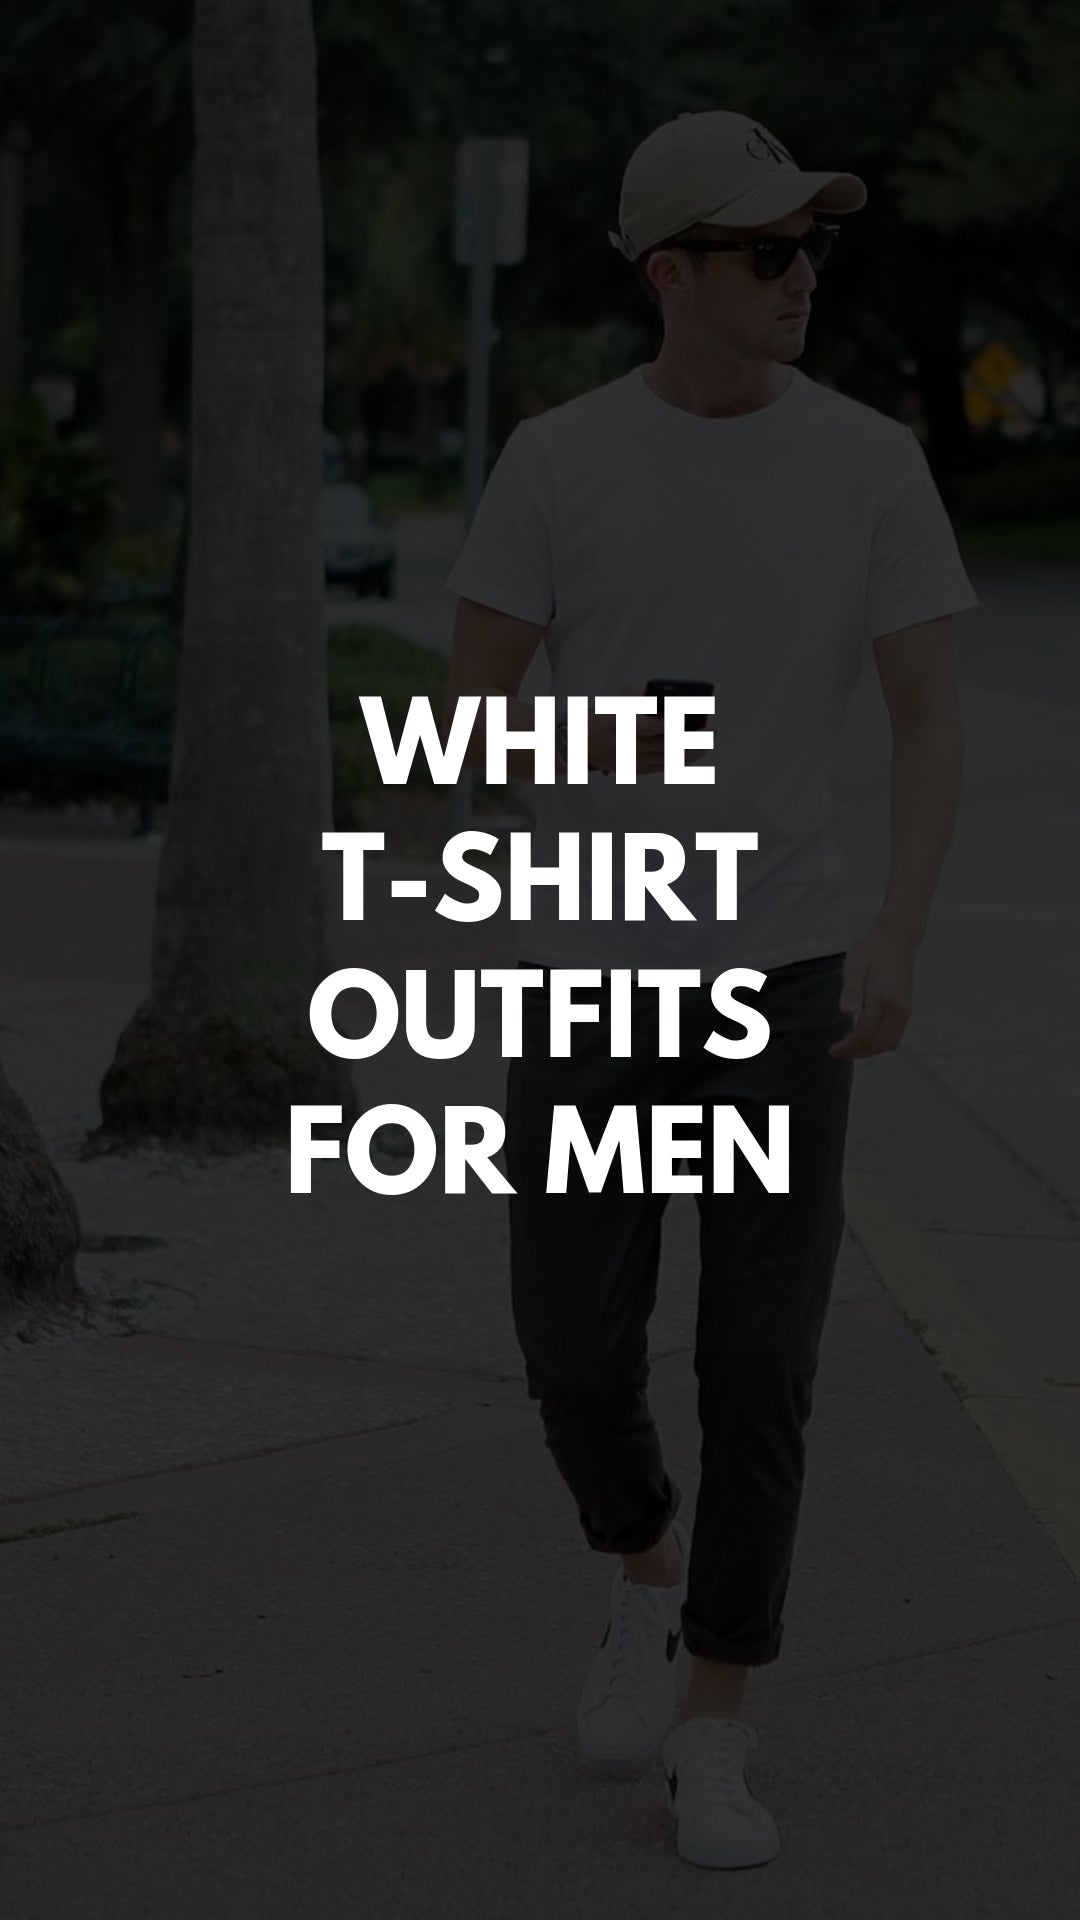 7 COOL WHITE   T-SHIRT OUTFITS FOR MEN